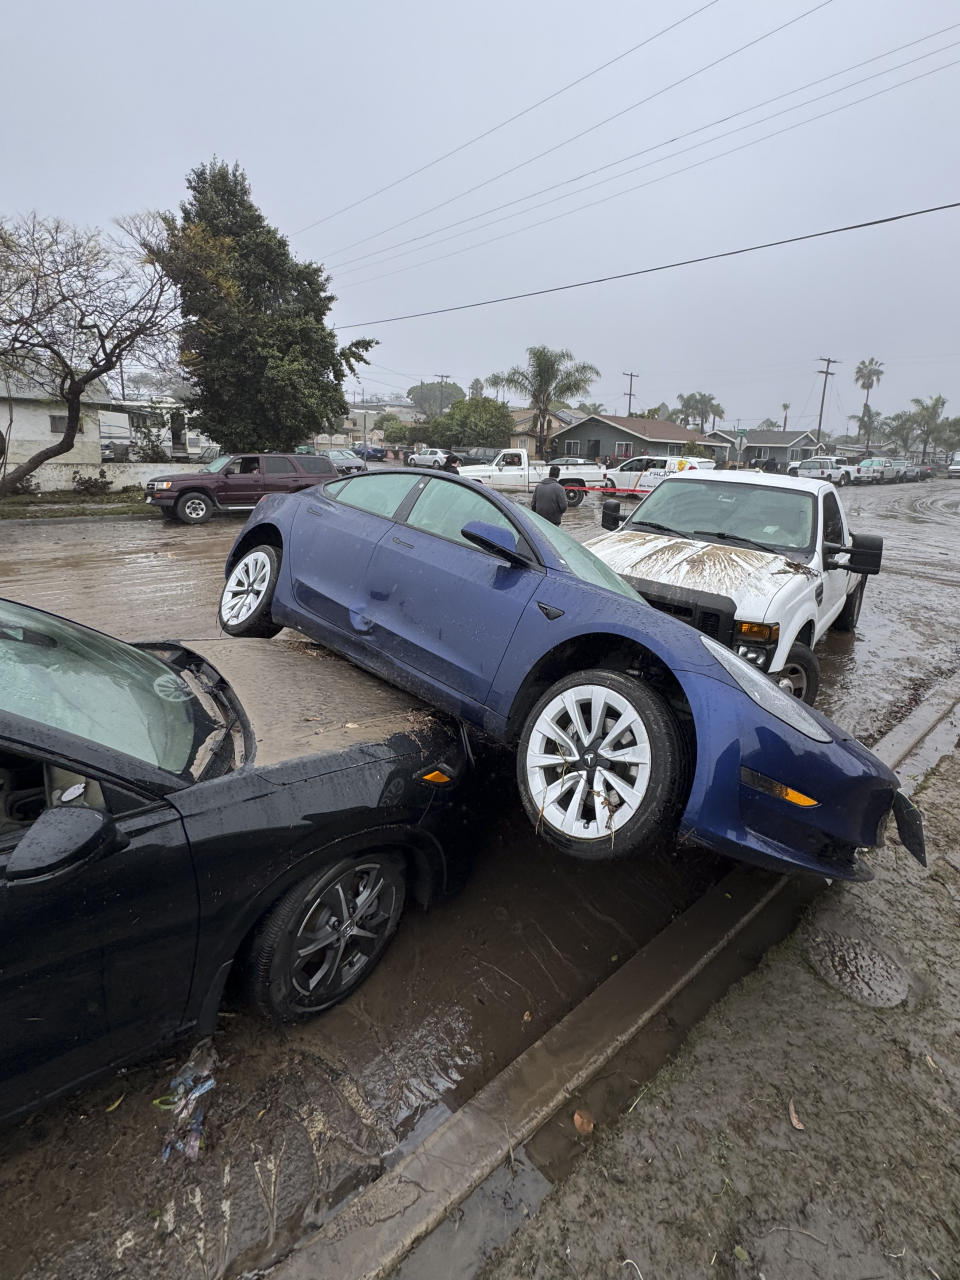 Cars sit damaged from floods during a rain storm Monday, Jan. 22, 2024, in San Diego. (AP Photo/Denis Poroy)